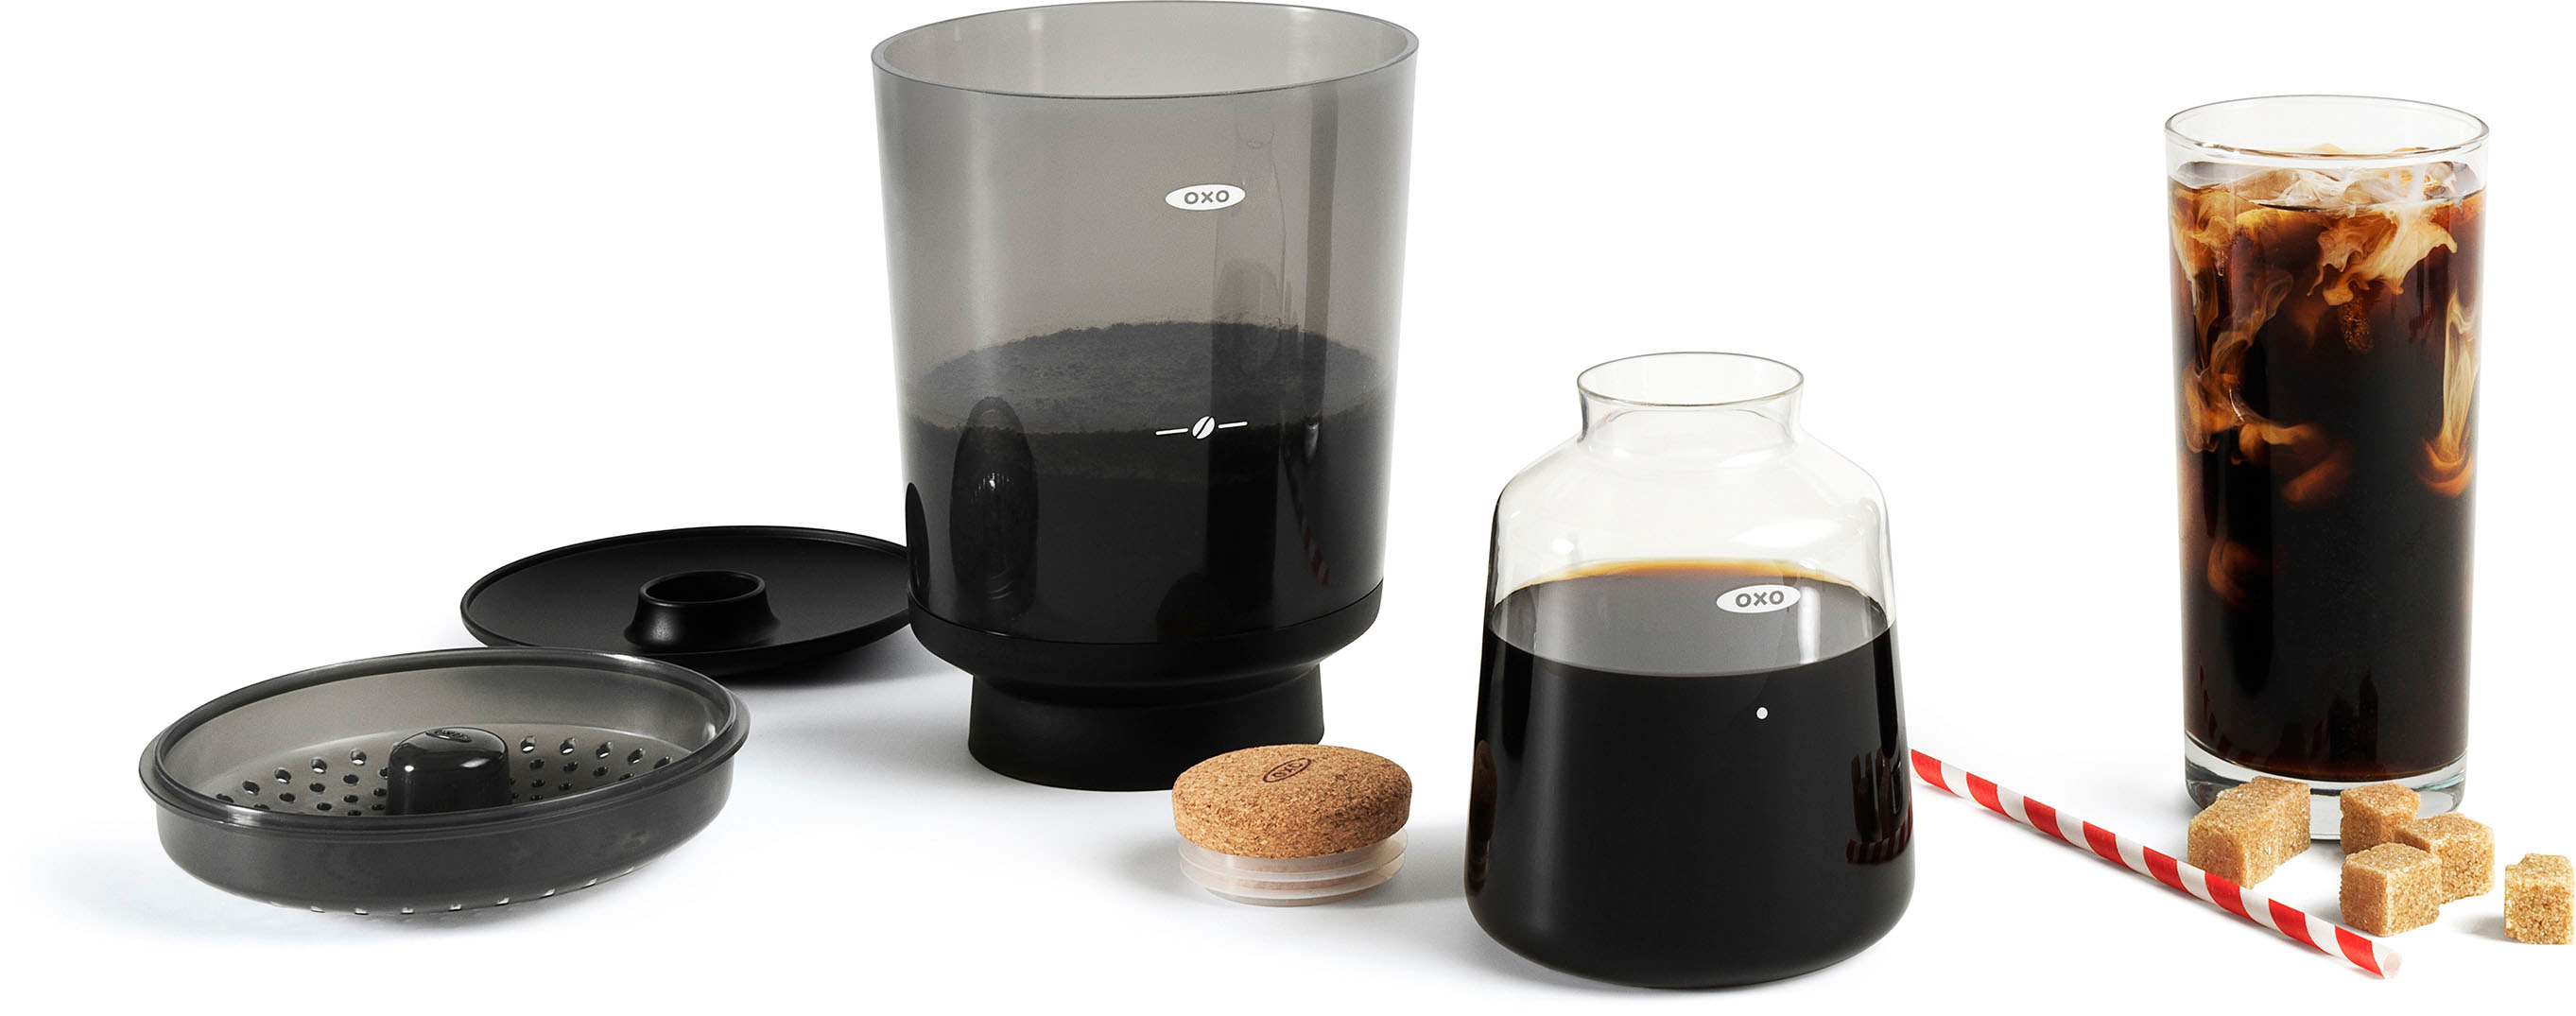 Angle View: OXO - Brew Compact Cold Brew Coffee Maker - Black